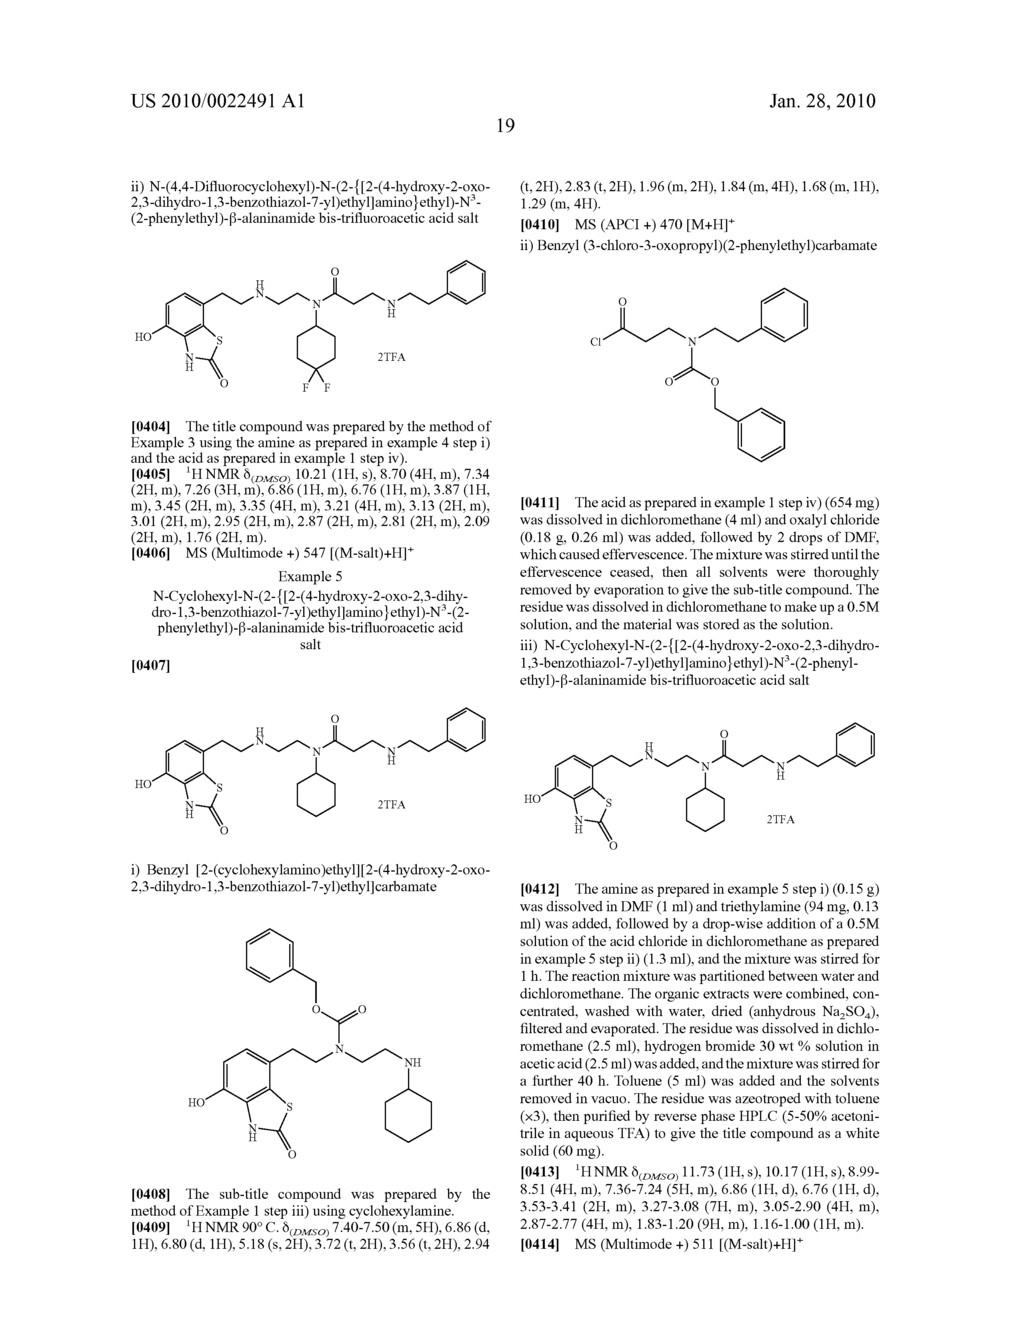 4-HYDROXY-2-OXO-2,3-DIHYDRO-1,3-BENZOTHIAZOL-7YL COMPOUNDS FOR MODULATION OF B2-ADRENORECEPTOR ACTIVITY - diagram, schematic, and image 20